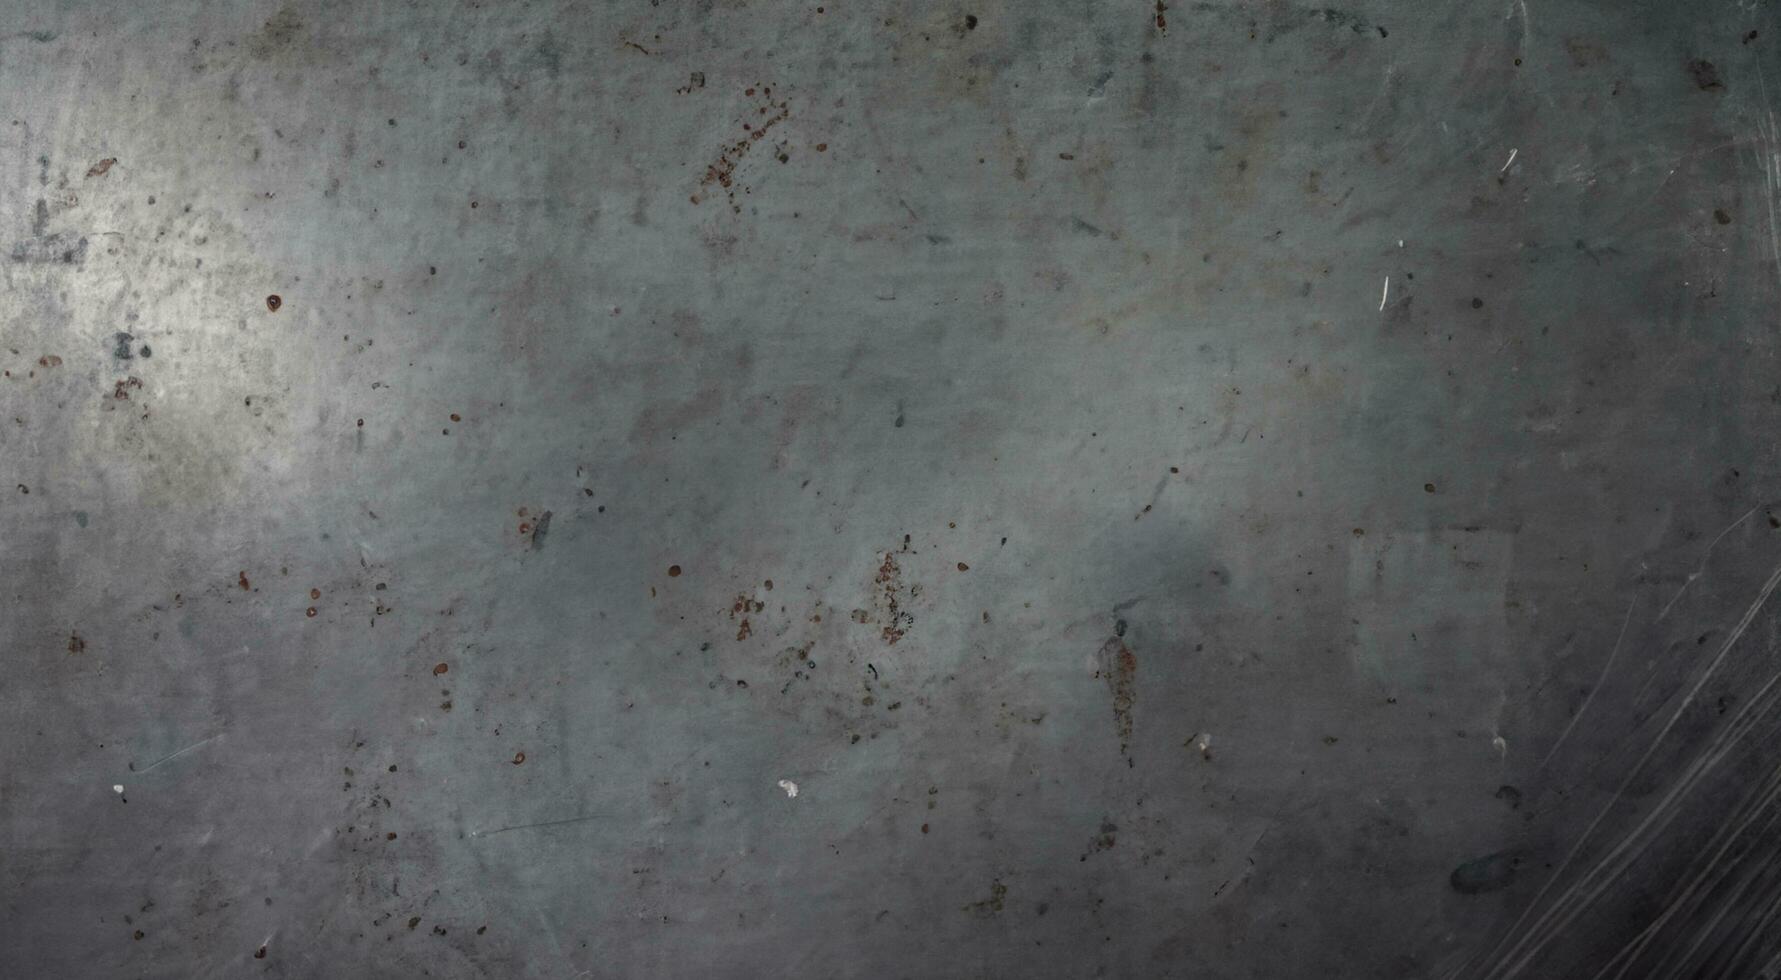 Metal grunge texture background, stained and scratched photo